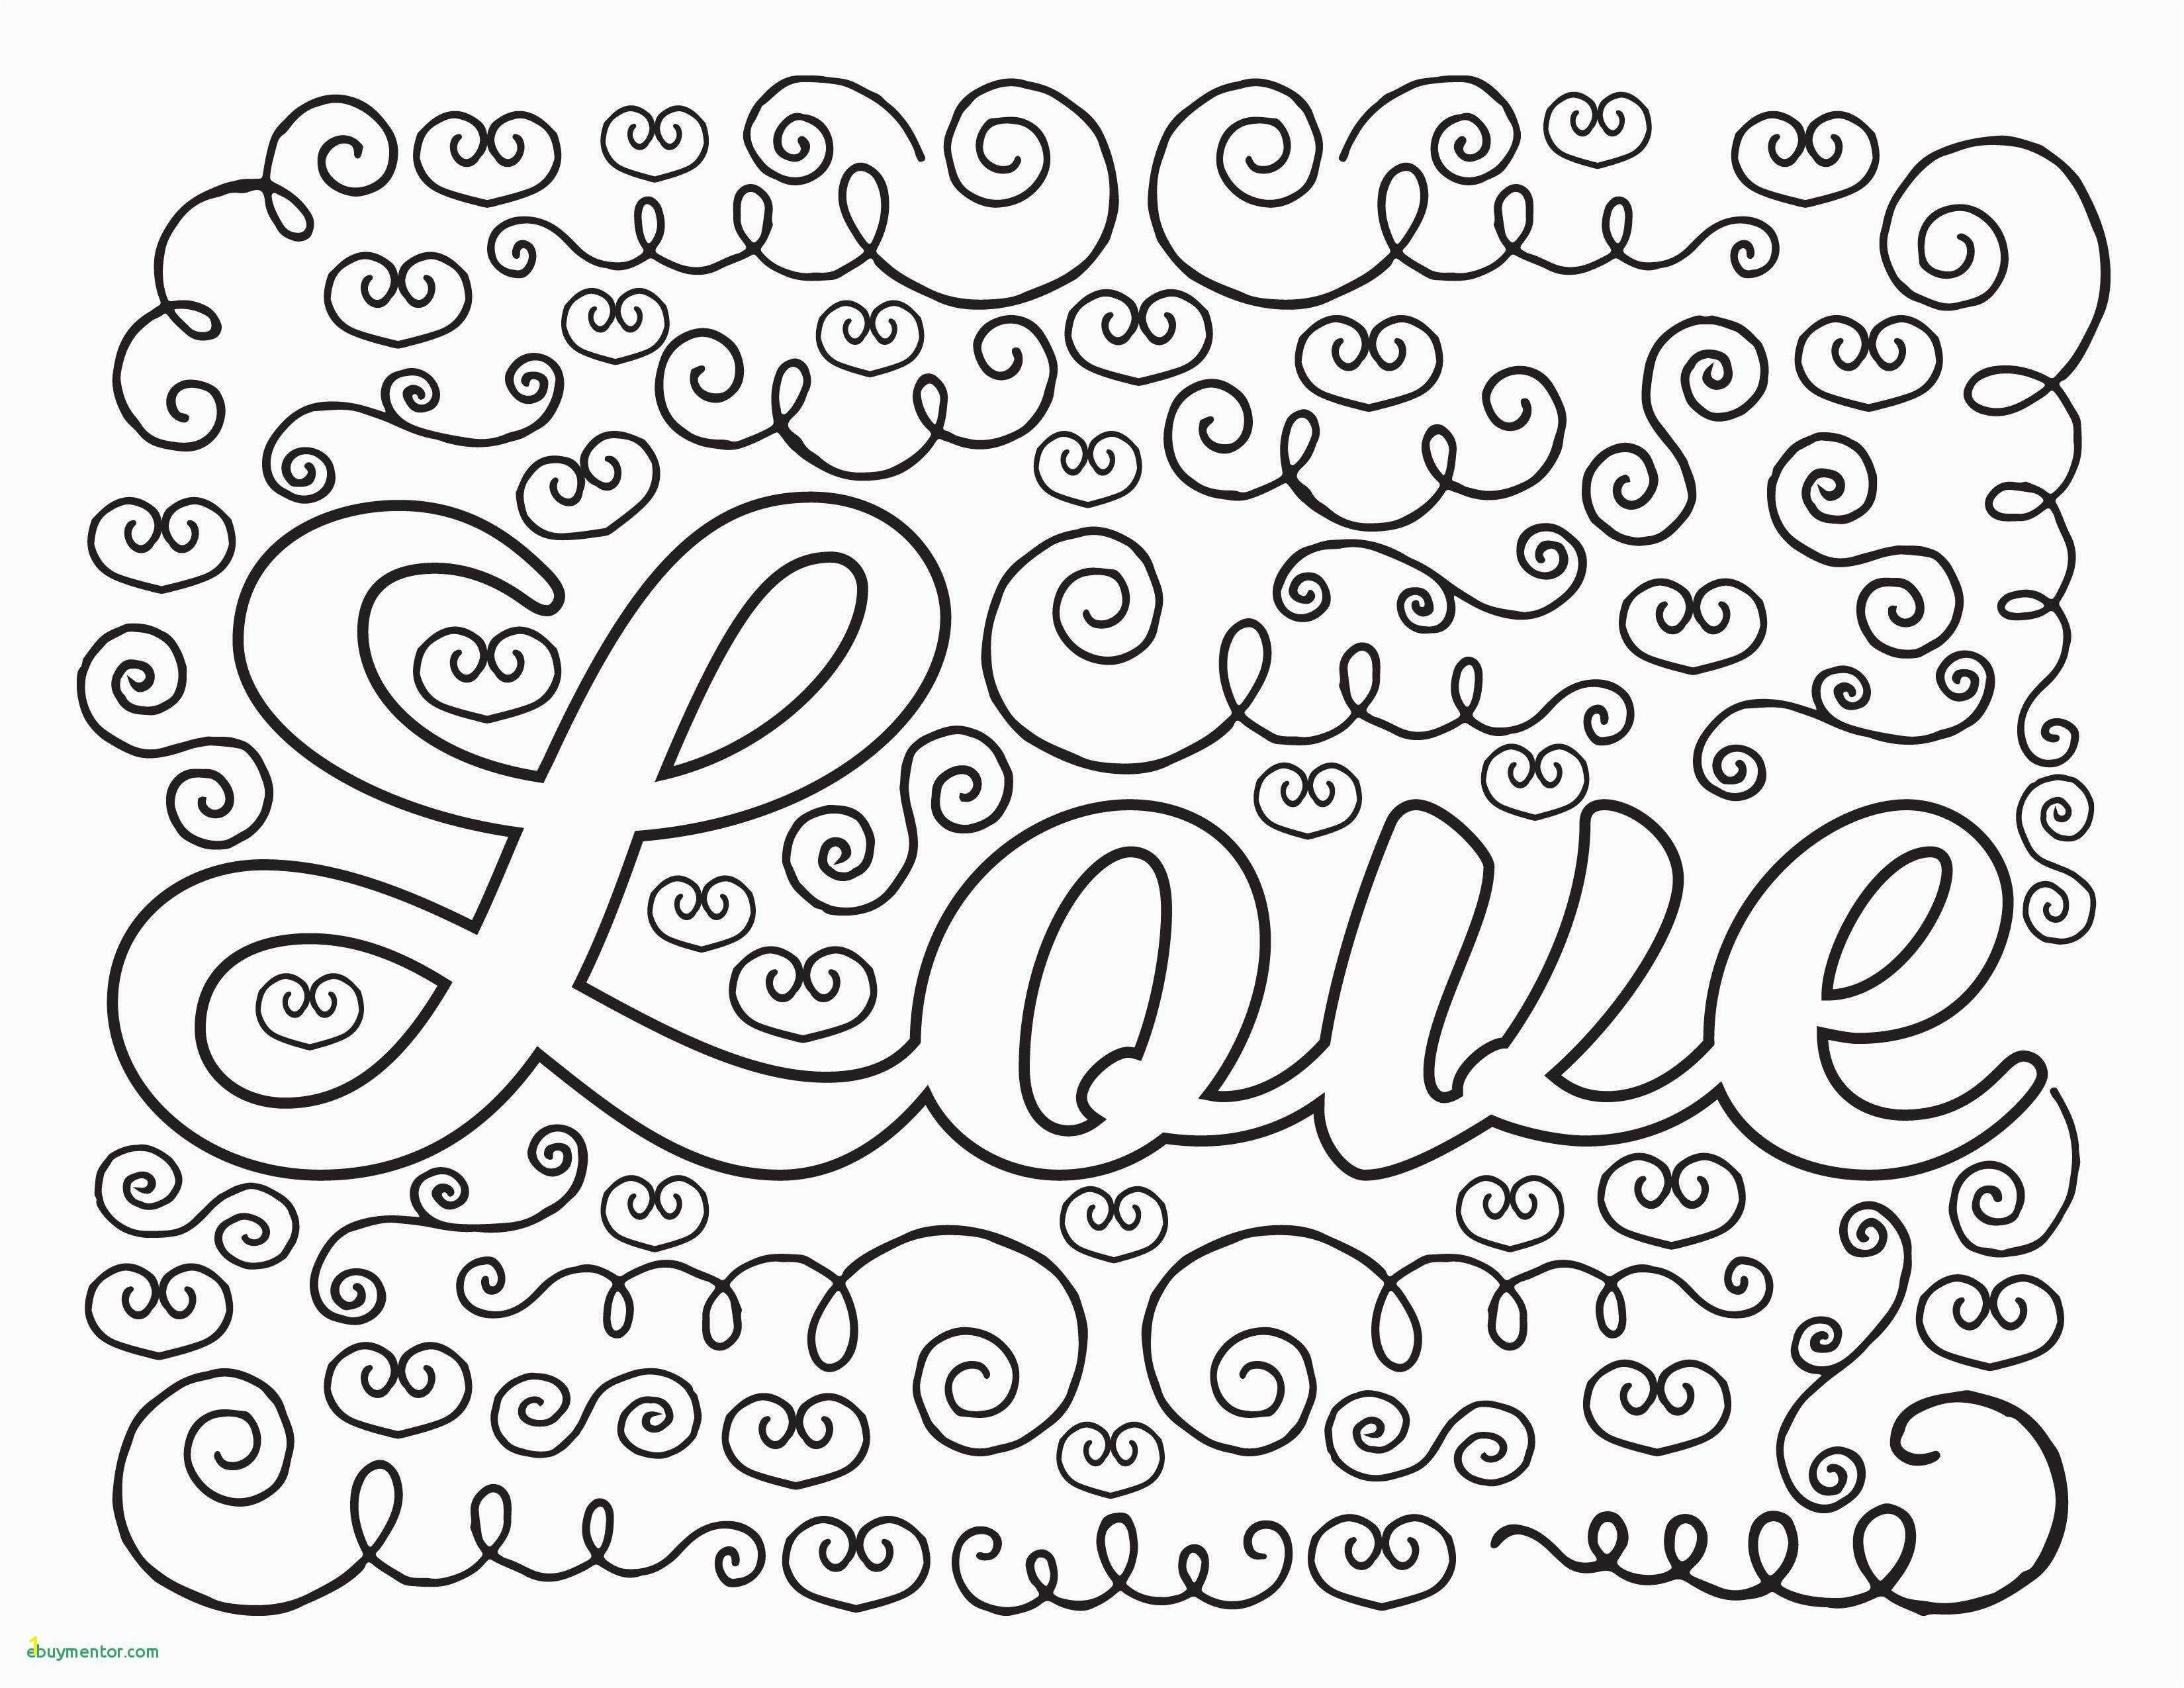 Happy New Year Coloring Pages Printable Merry Christmas and Happy New Year Coloring Pages Cute Printable